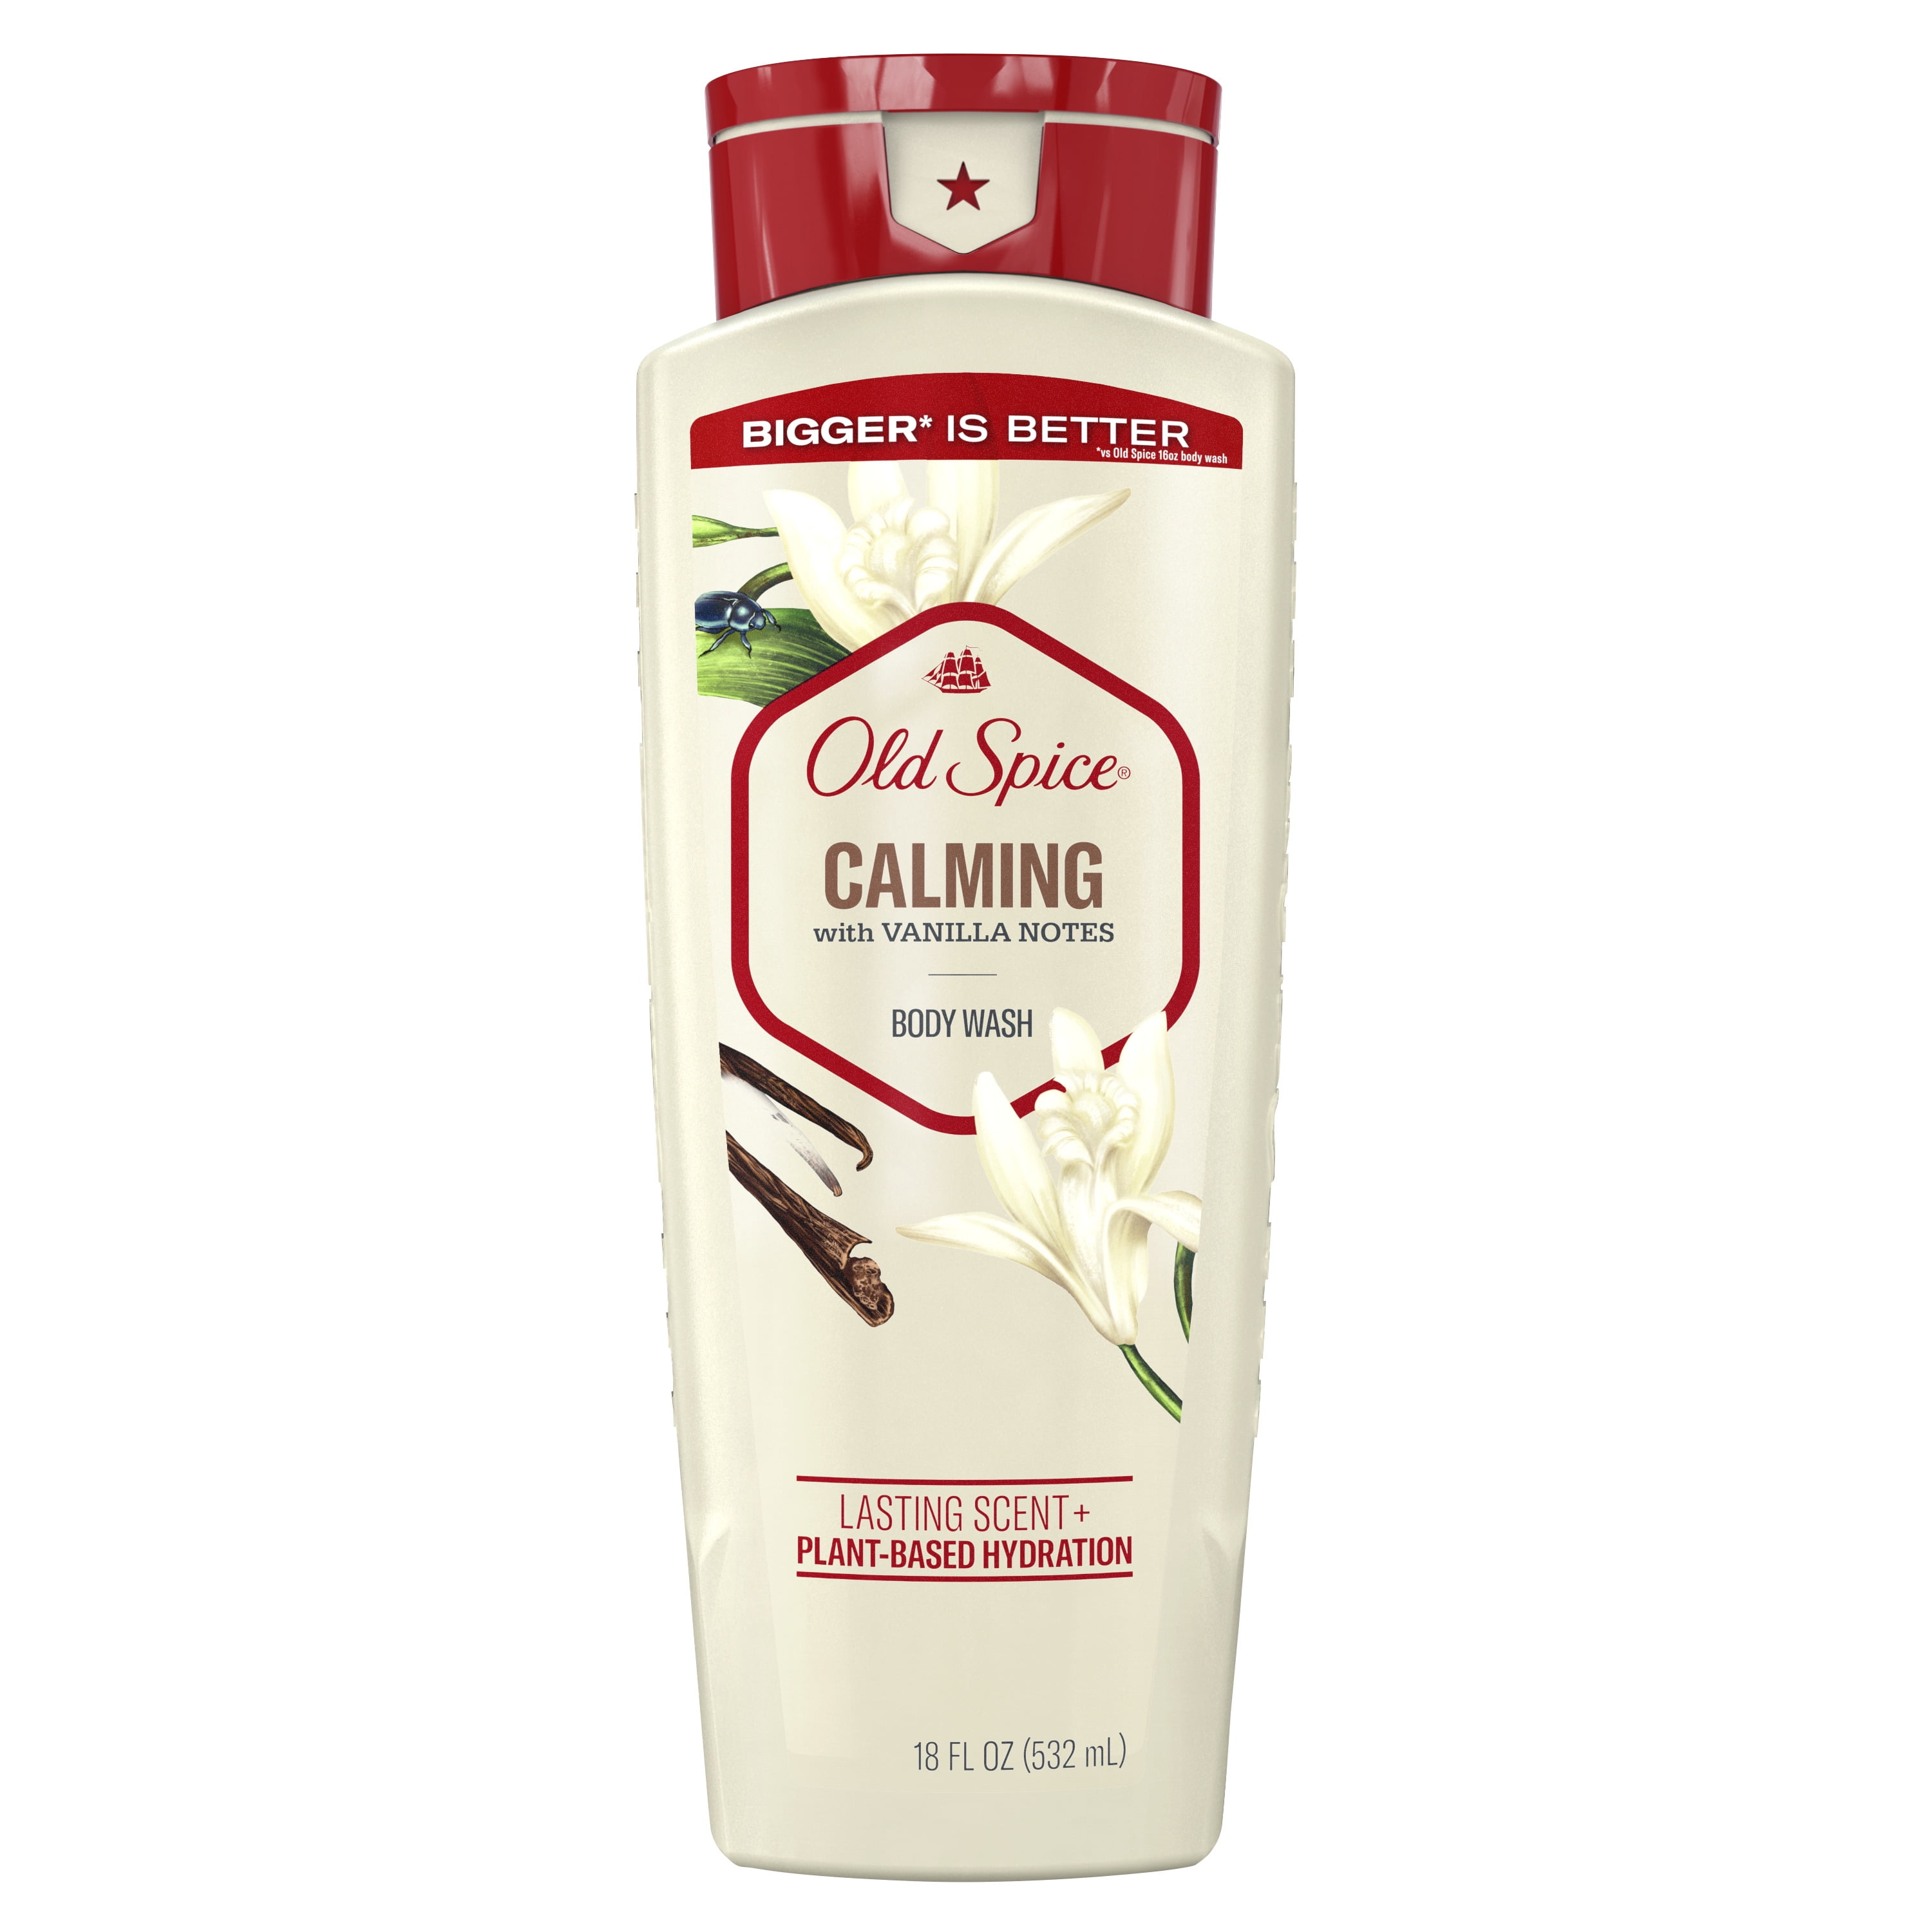 Old Spice Men's Body Wash Calming with Vanilla Notes, 18 oz